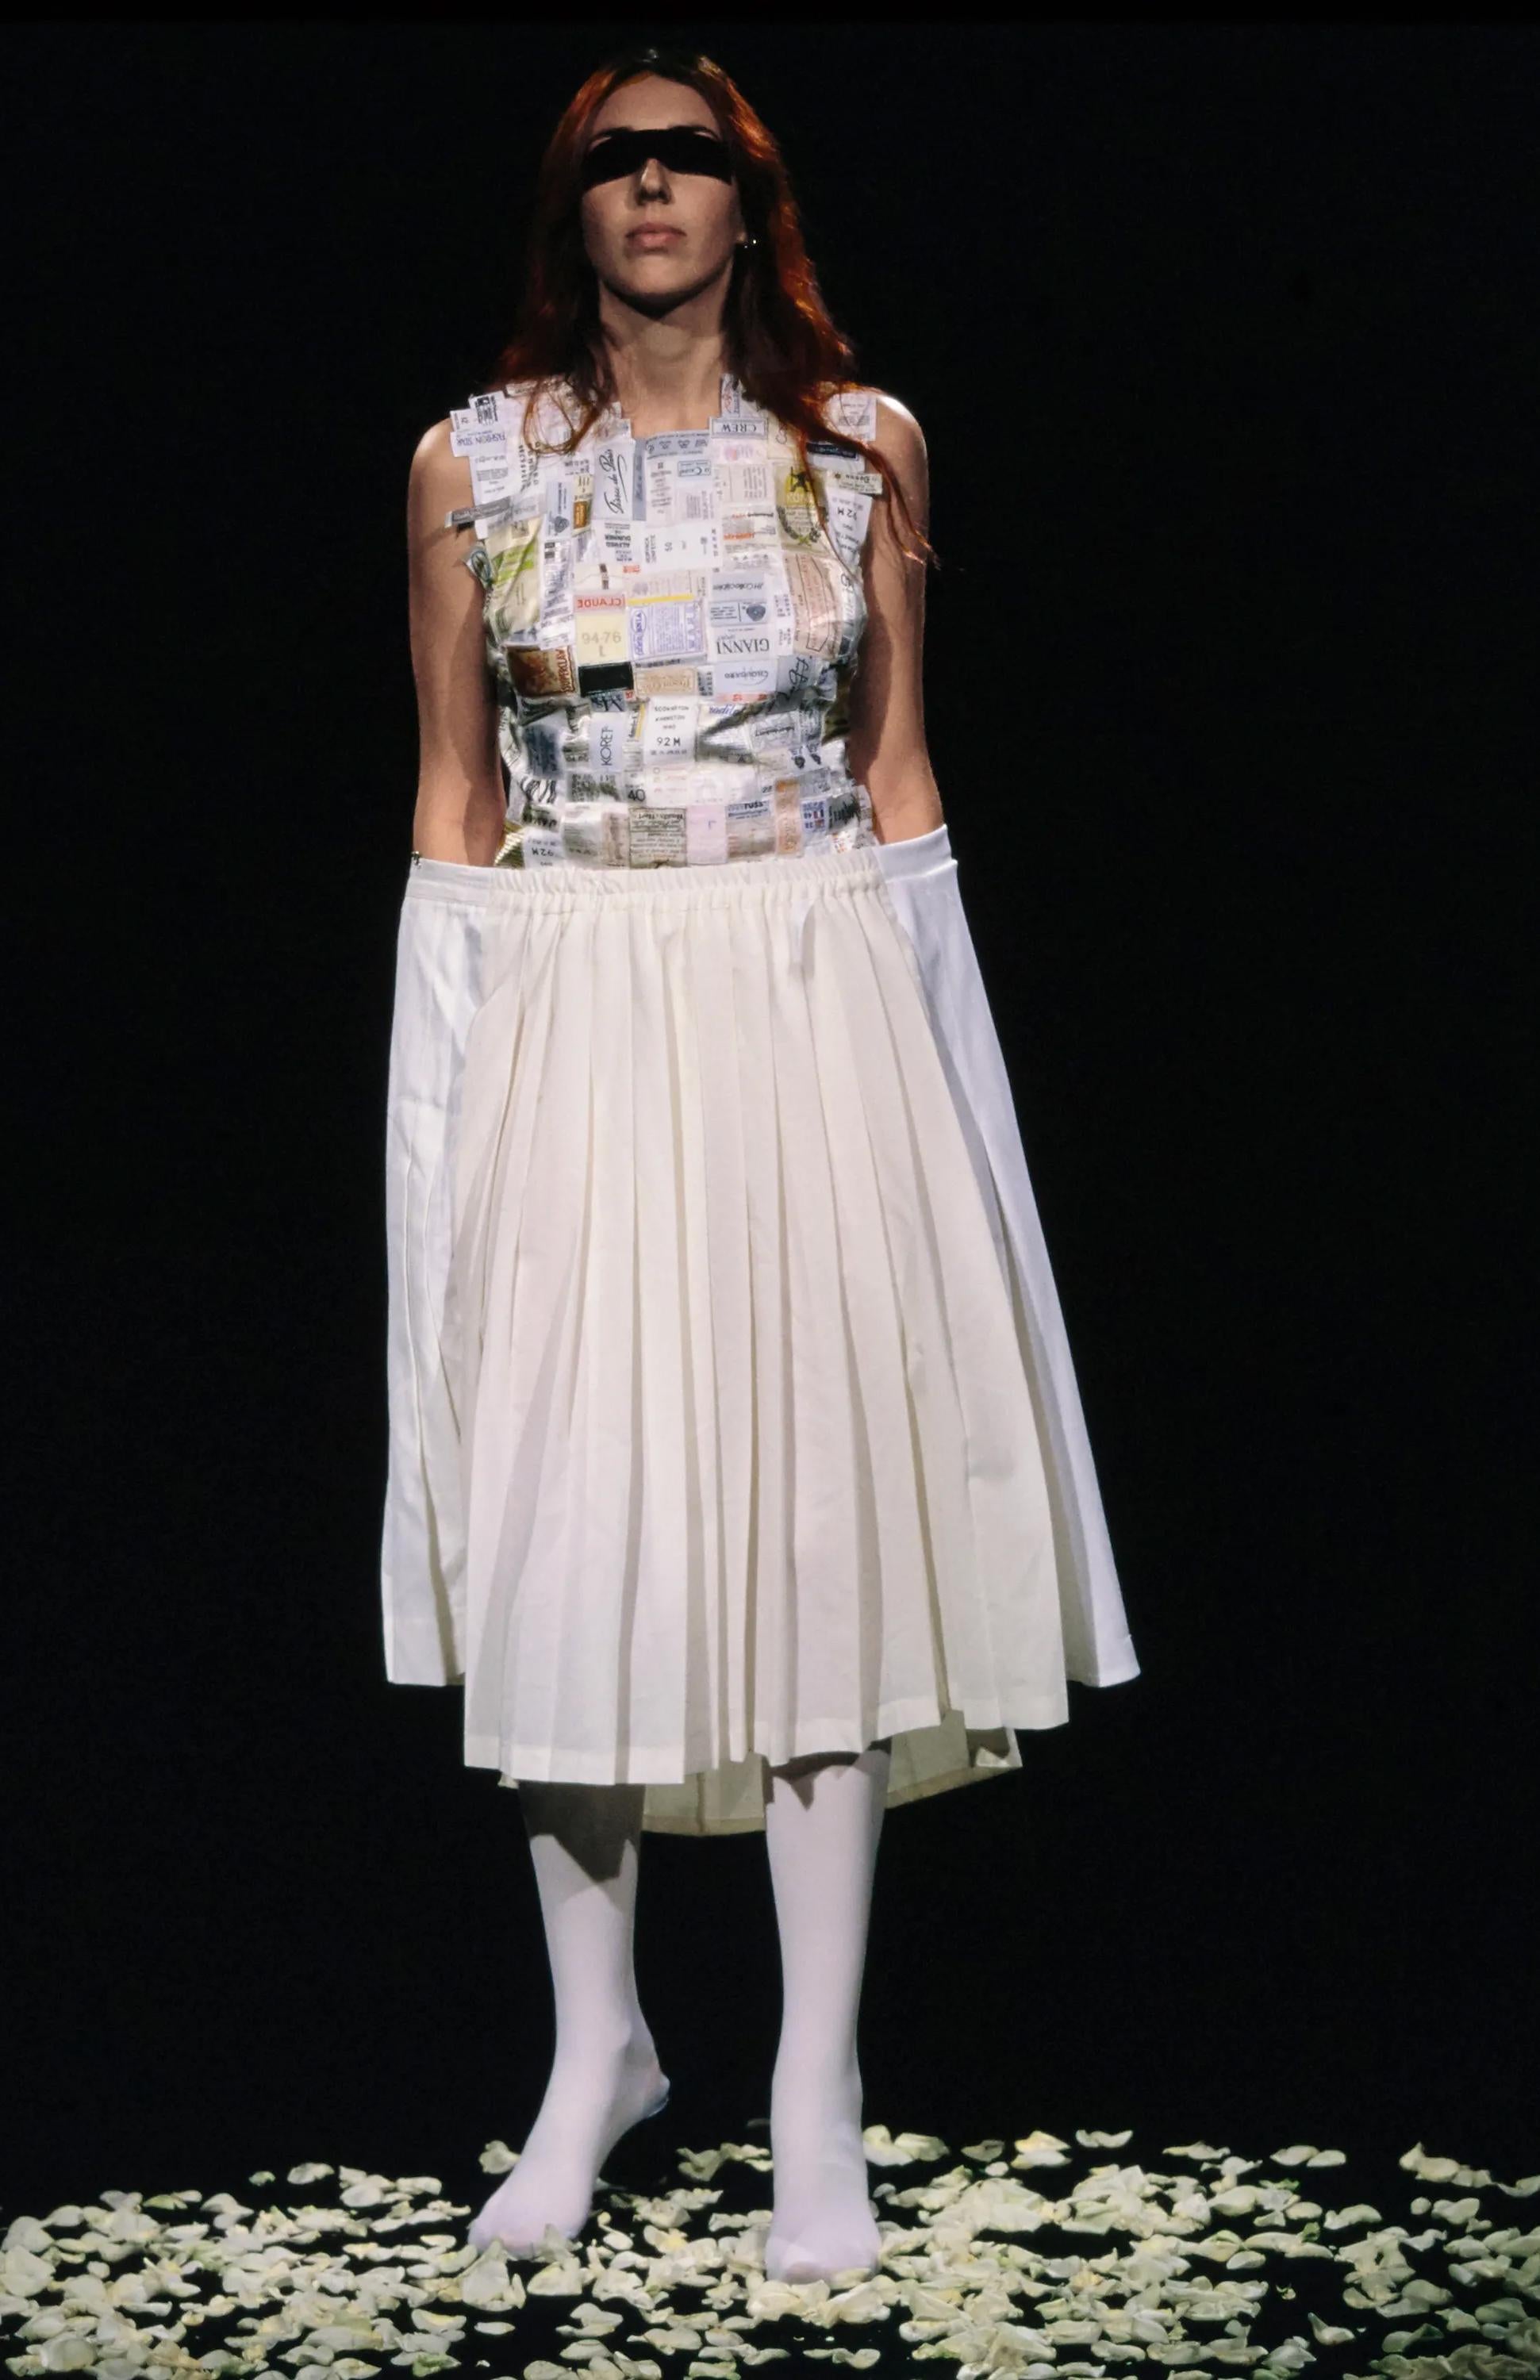 S/S 2001 Maison Martin Margiela one-of-one artisanal ecru pleated skirt with asymmetrical deconstructed structure. Concealed back zip closure, with built-in interior button closure to create asymmetrical side 'pocket' appearance. Oversized hook and